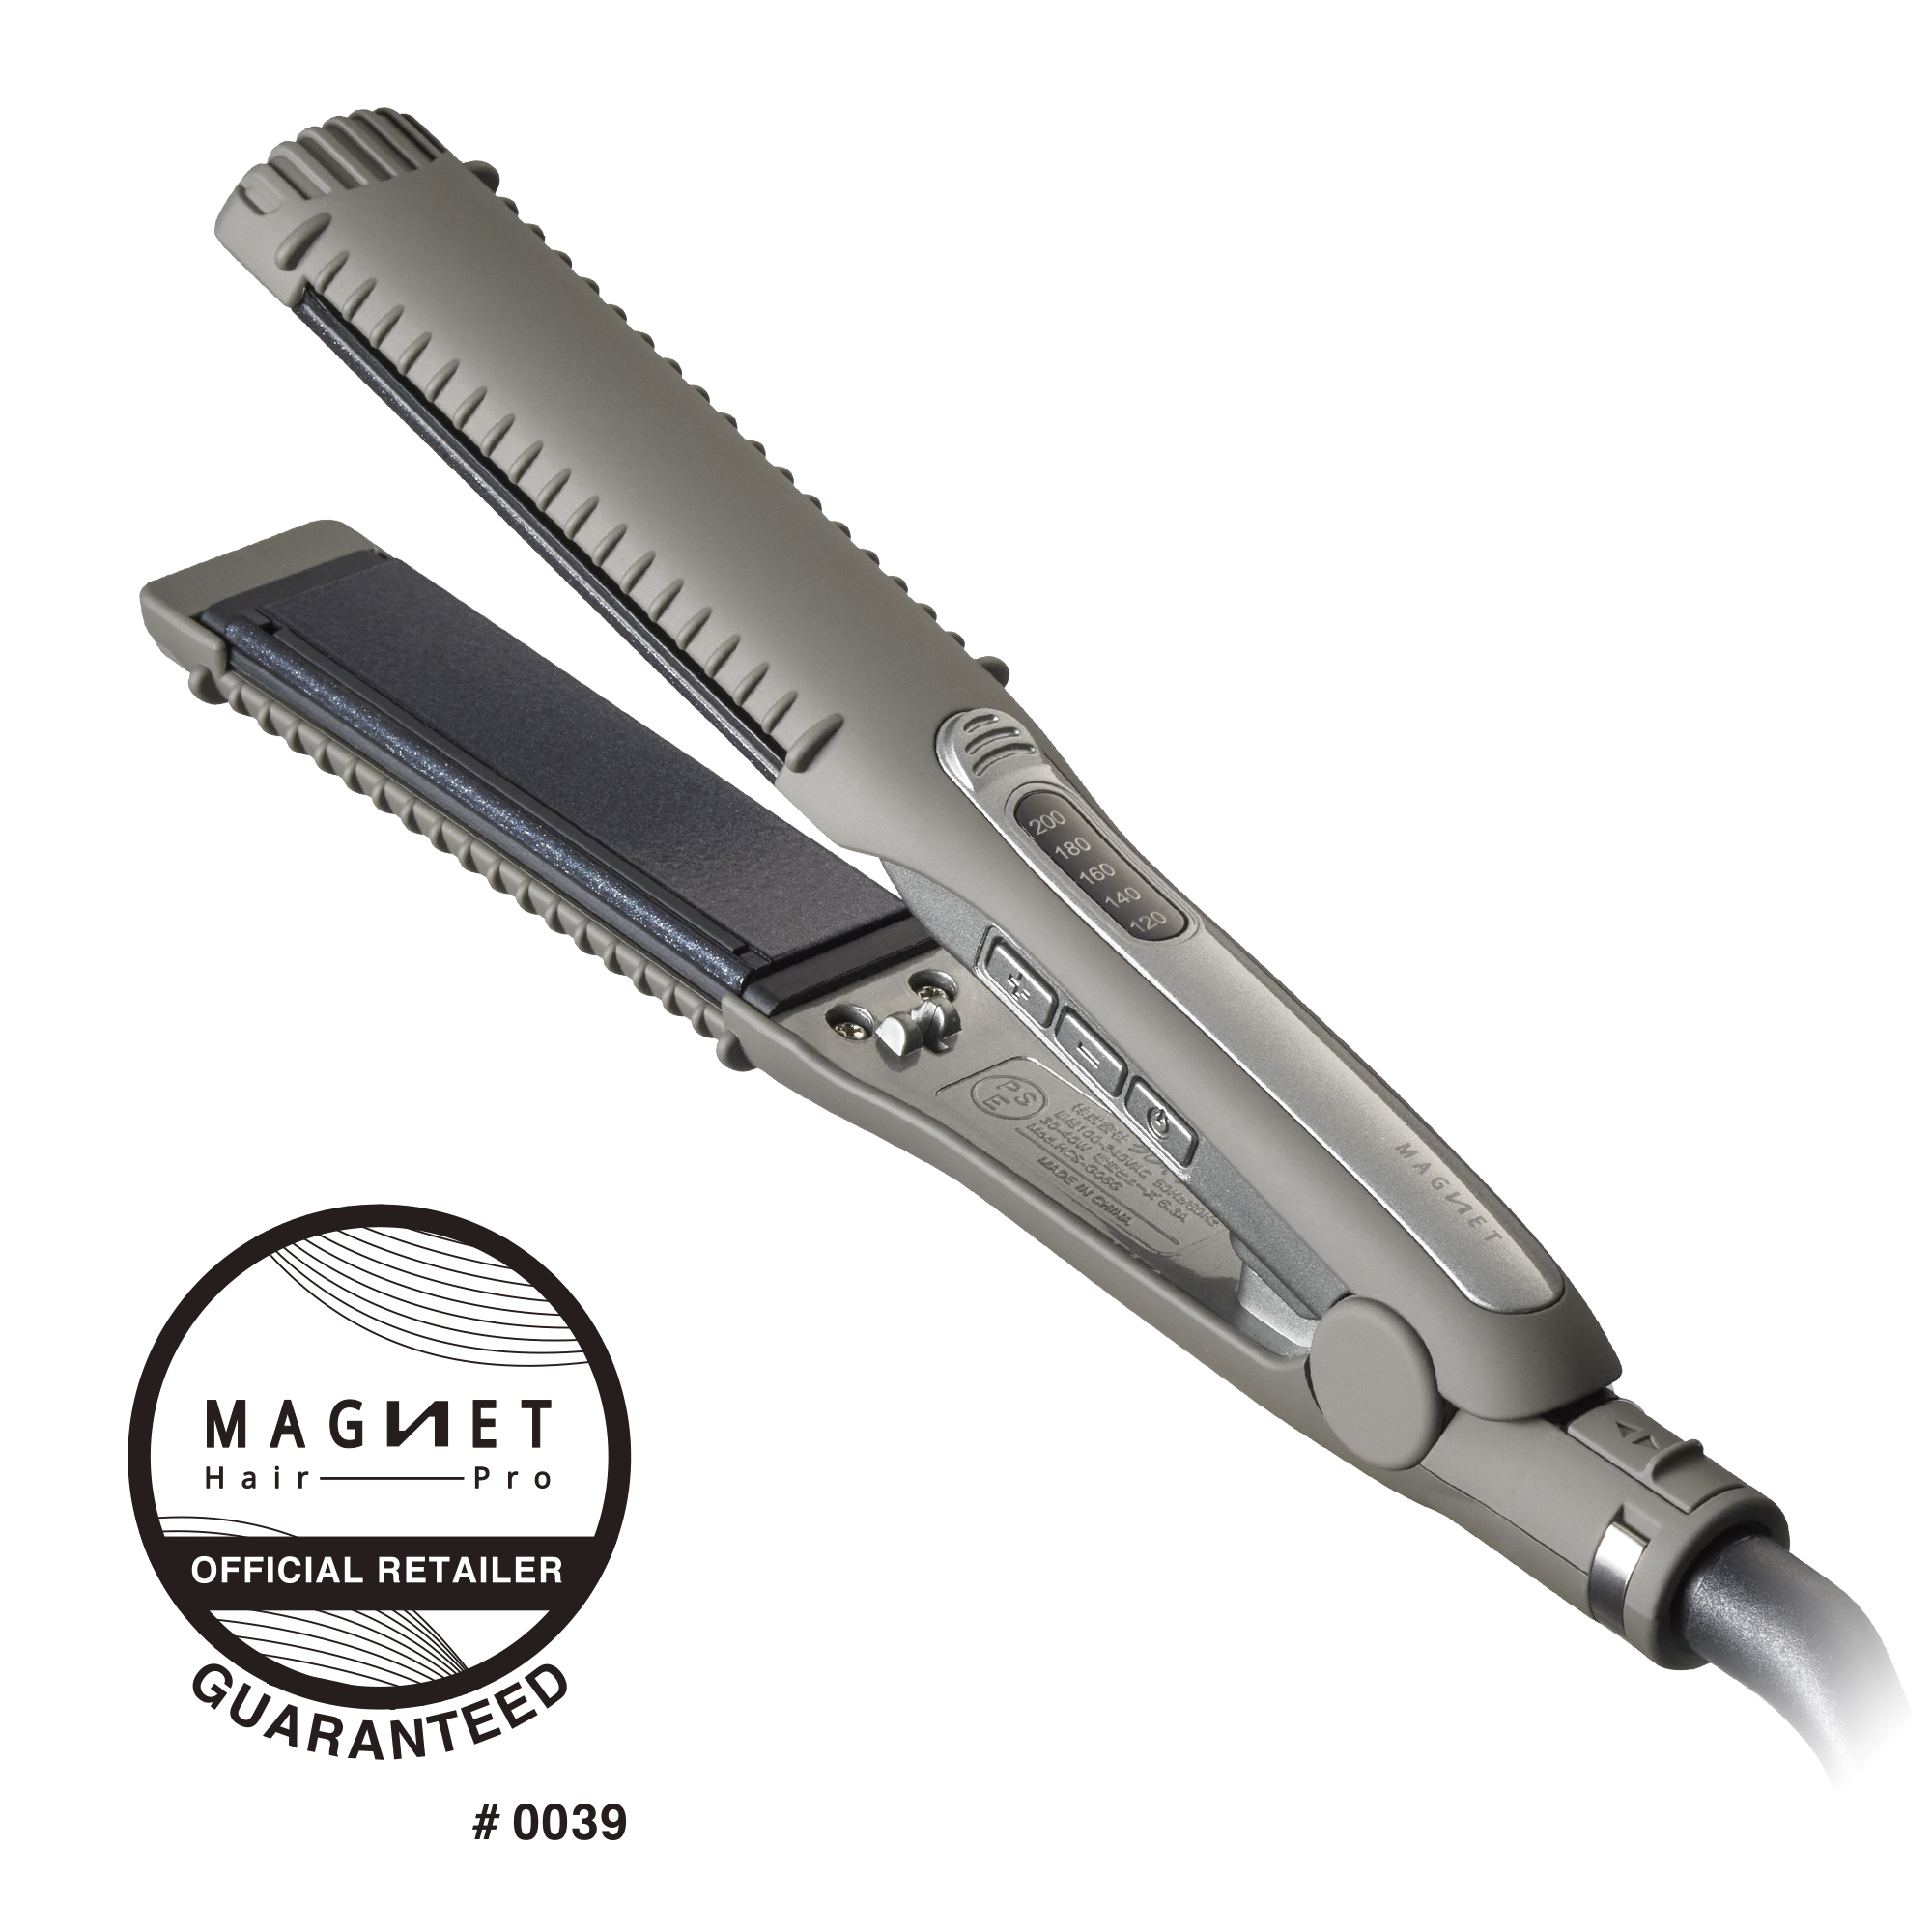 HOLISTIC cures MAGNETHairPro STRAIGHT IRON S